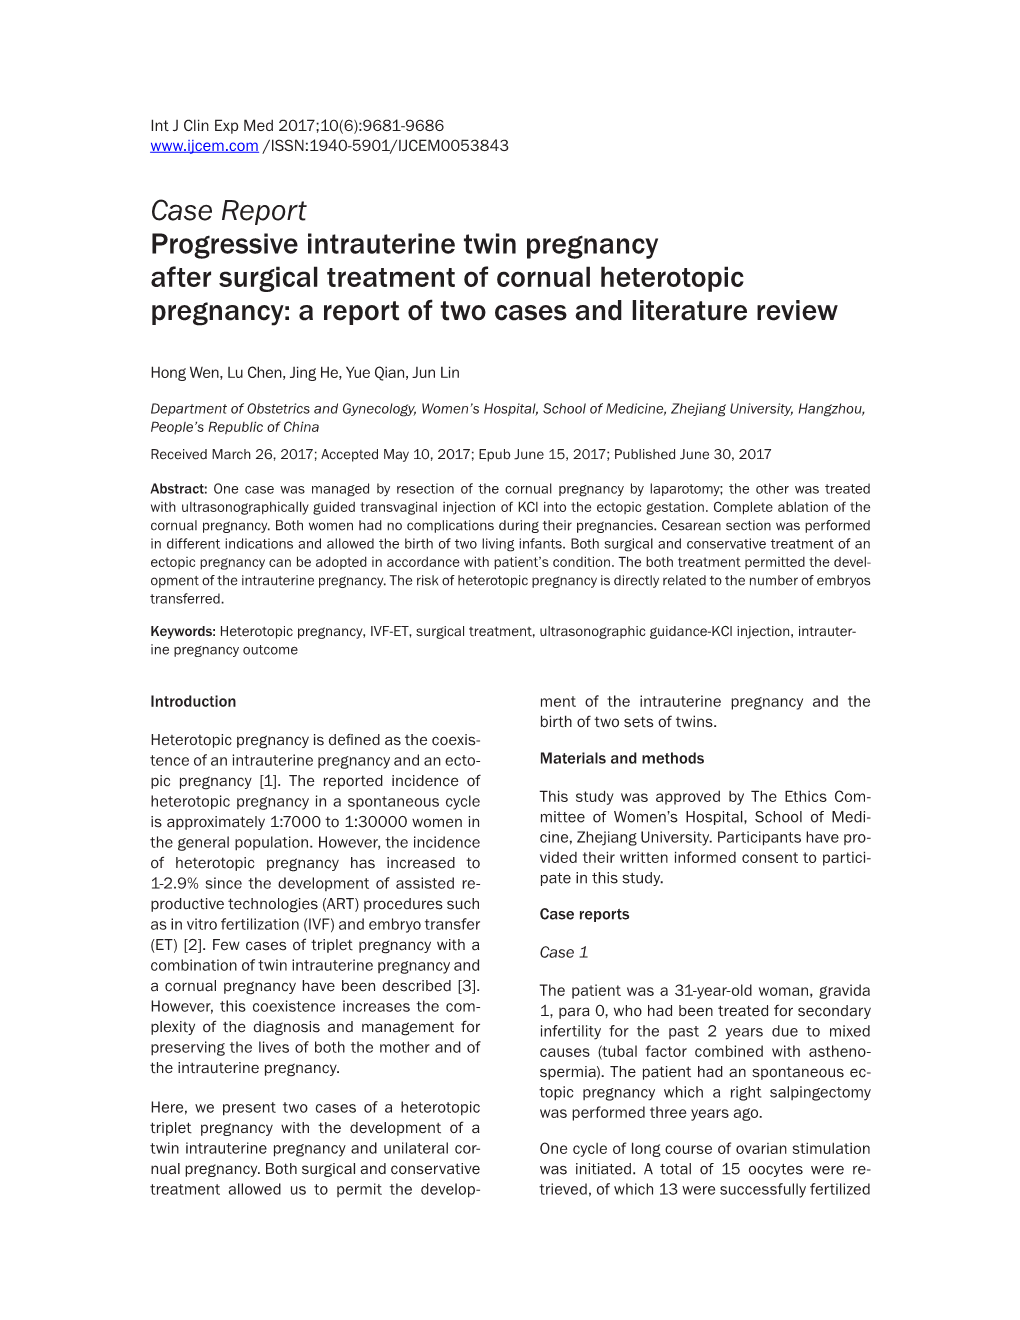 Case Report Progressive Intrauterine Twin Pregnancy After Surgical Treatment of Cornual Heterotopic Pregnancy: a Report of Two Cases and Literature Review